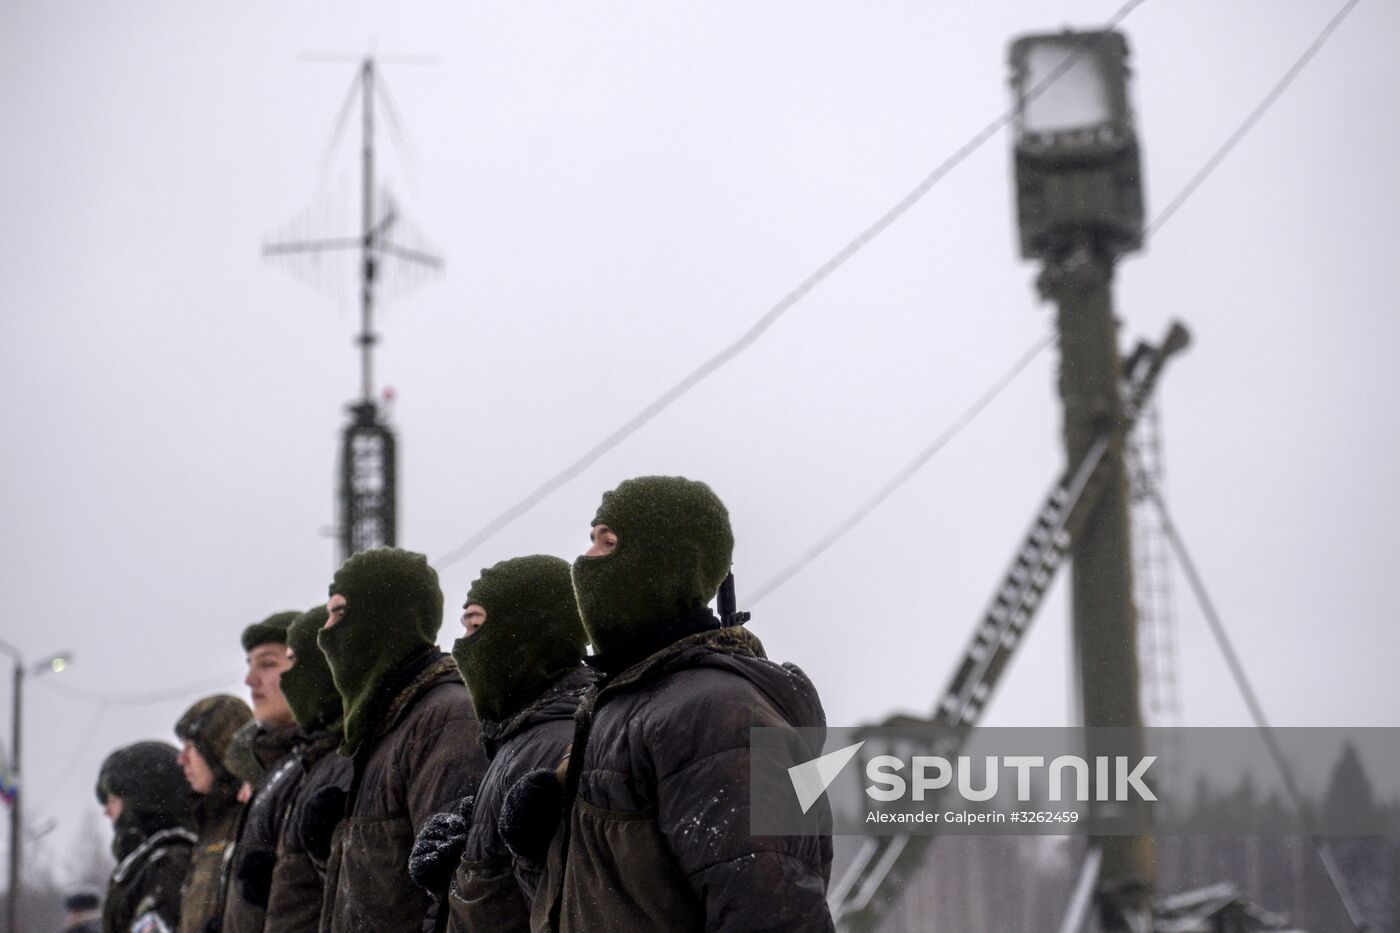 Military drill with S-400 anti-aircraft system in Leningrad Region